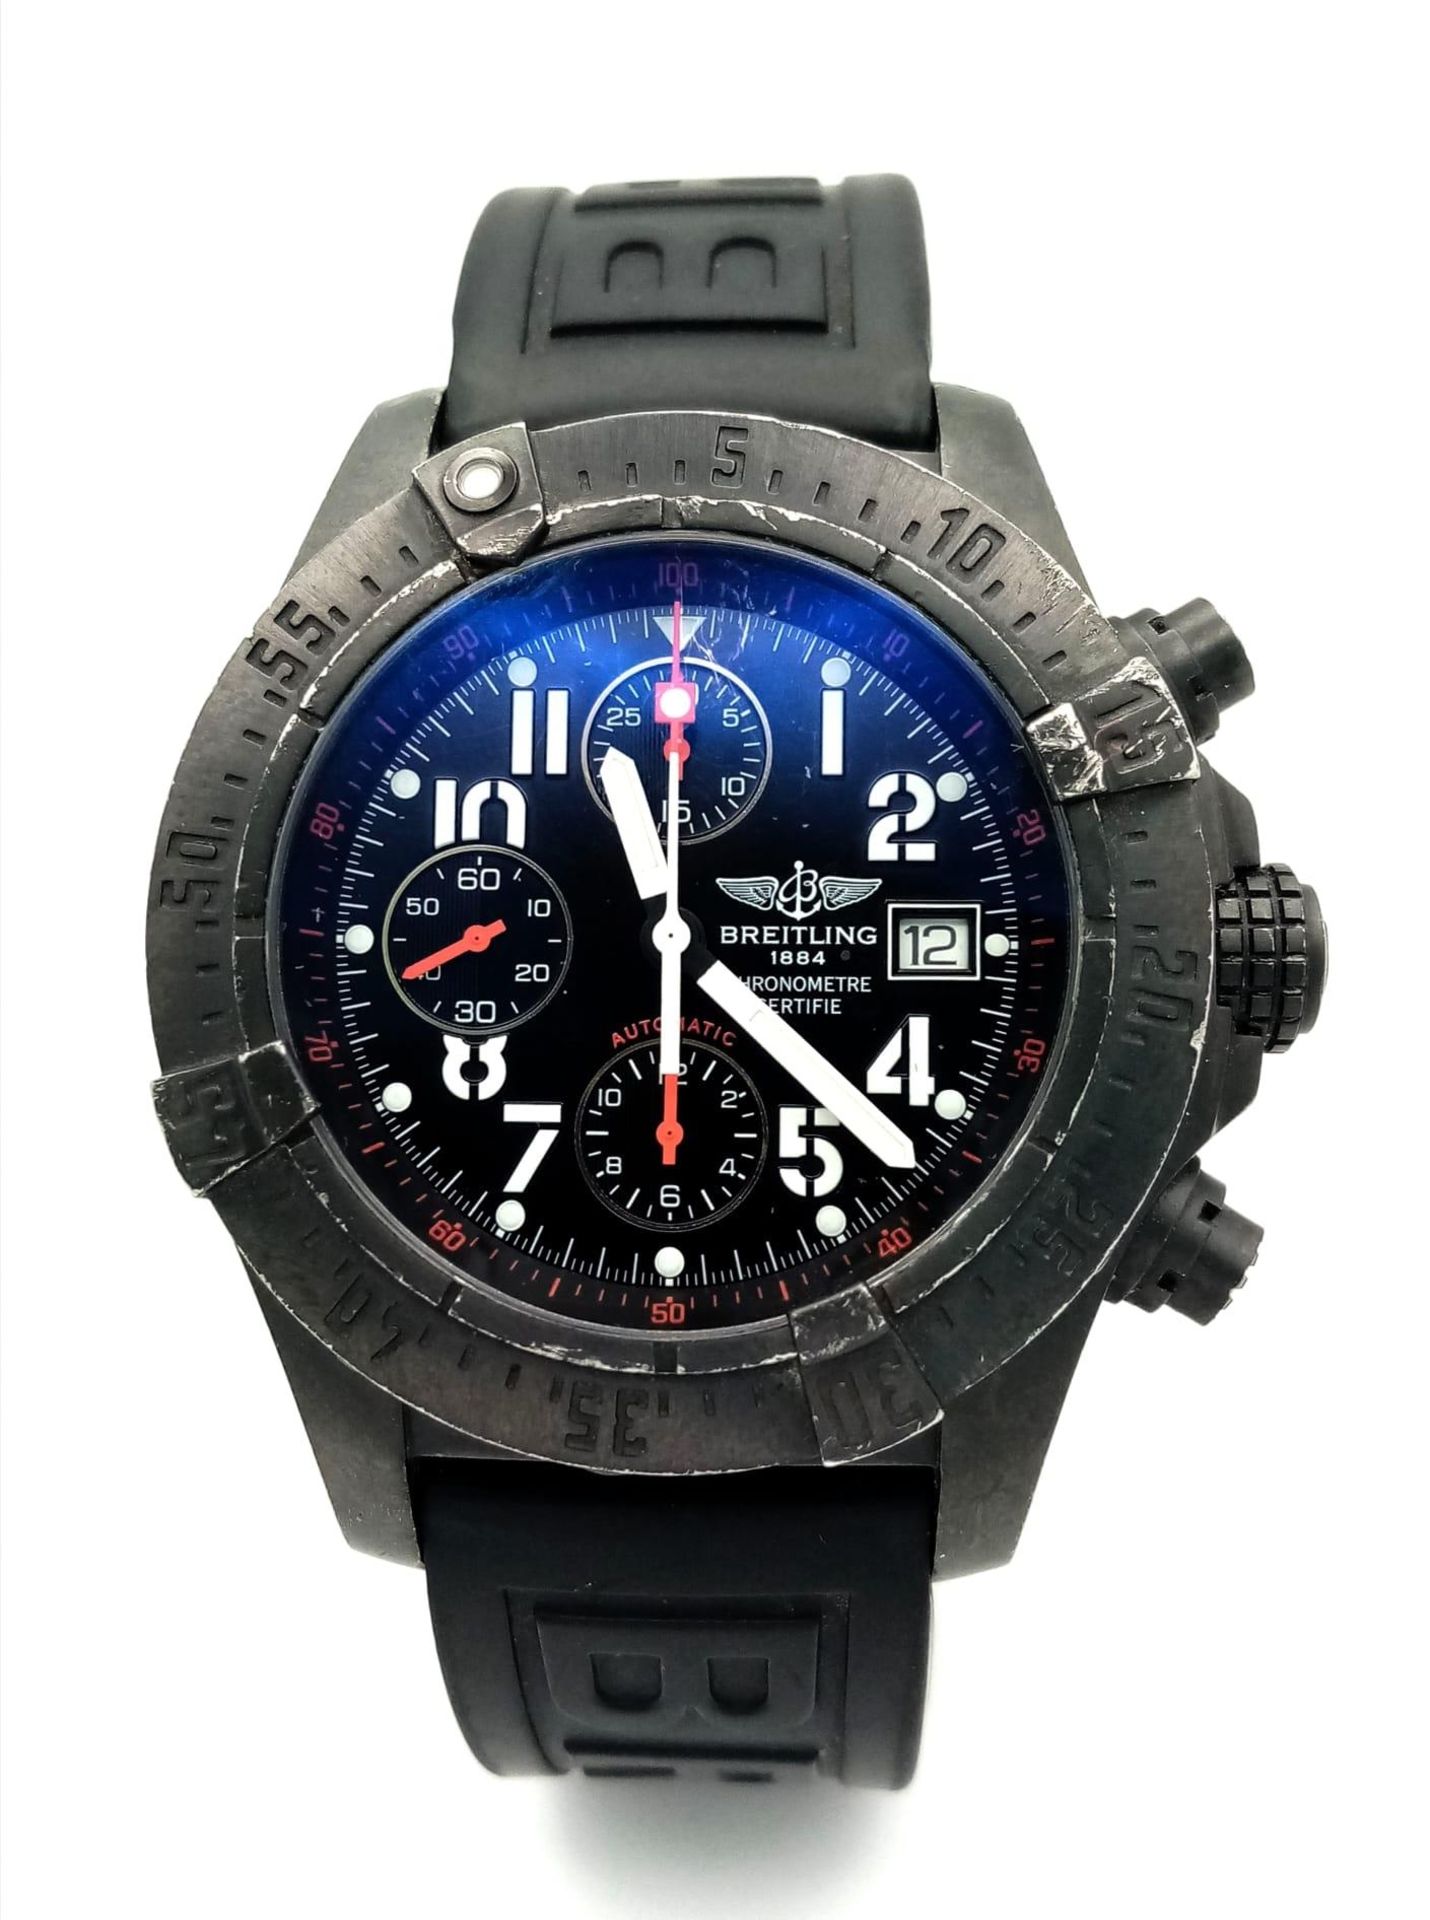 A Breitling Limited Edition (740/2000) Automatic Chronograph Gents Watch. Black rubber strap. - Image 2 of 13